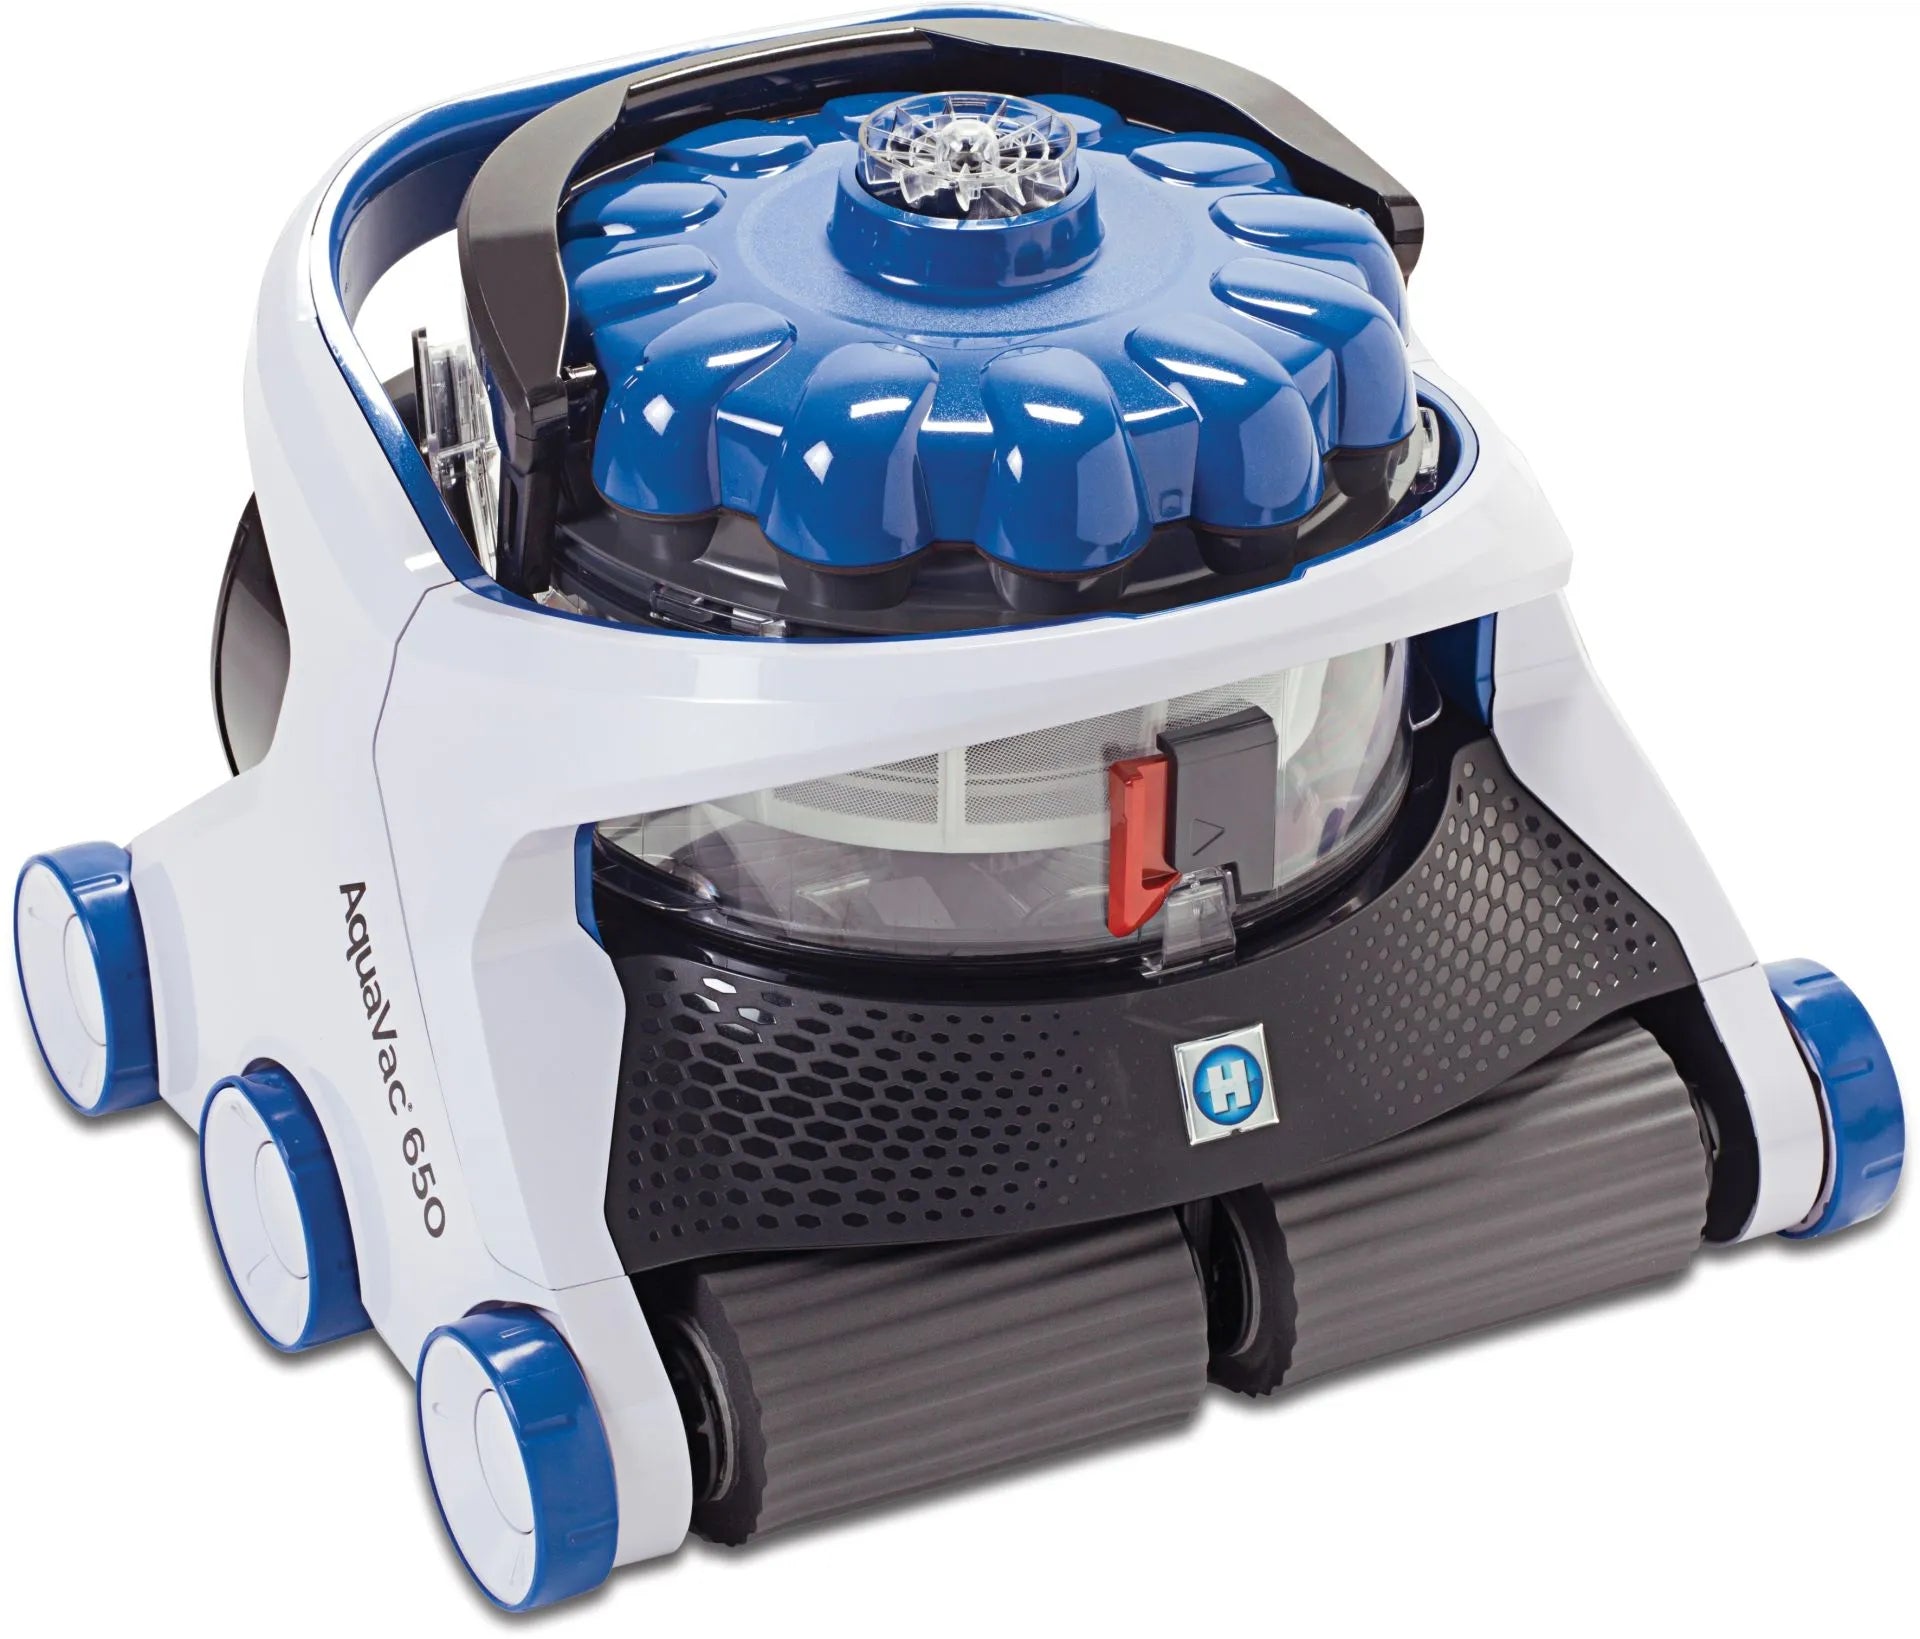 Hayward Aquavac 650 Robot pool cleaner with Wifi and trolley